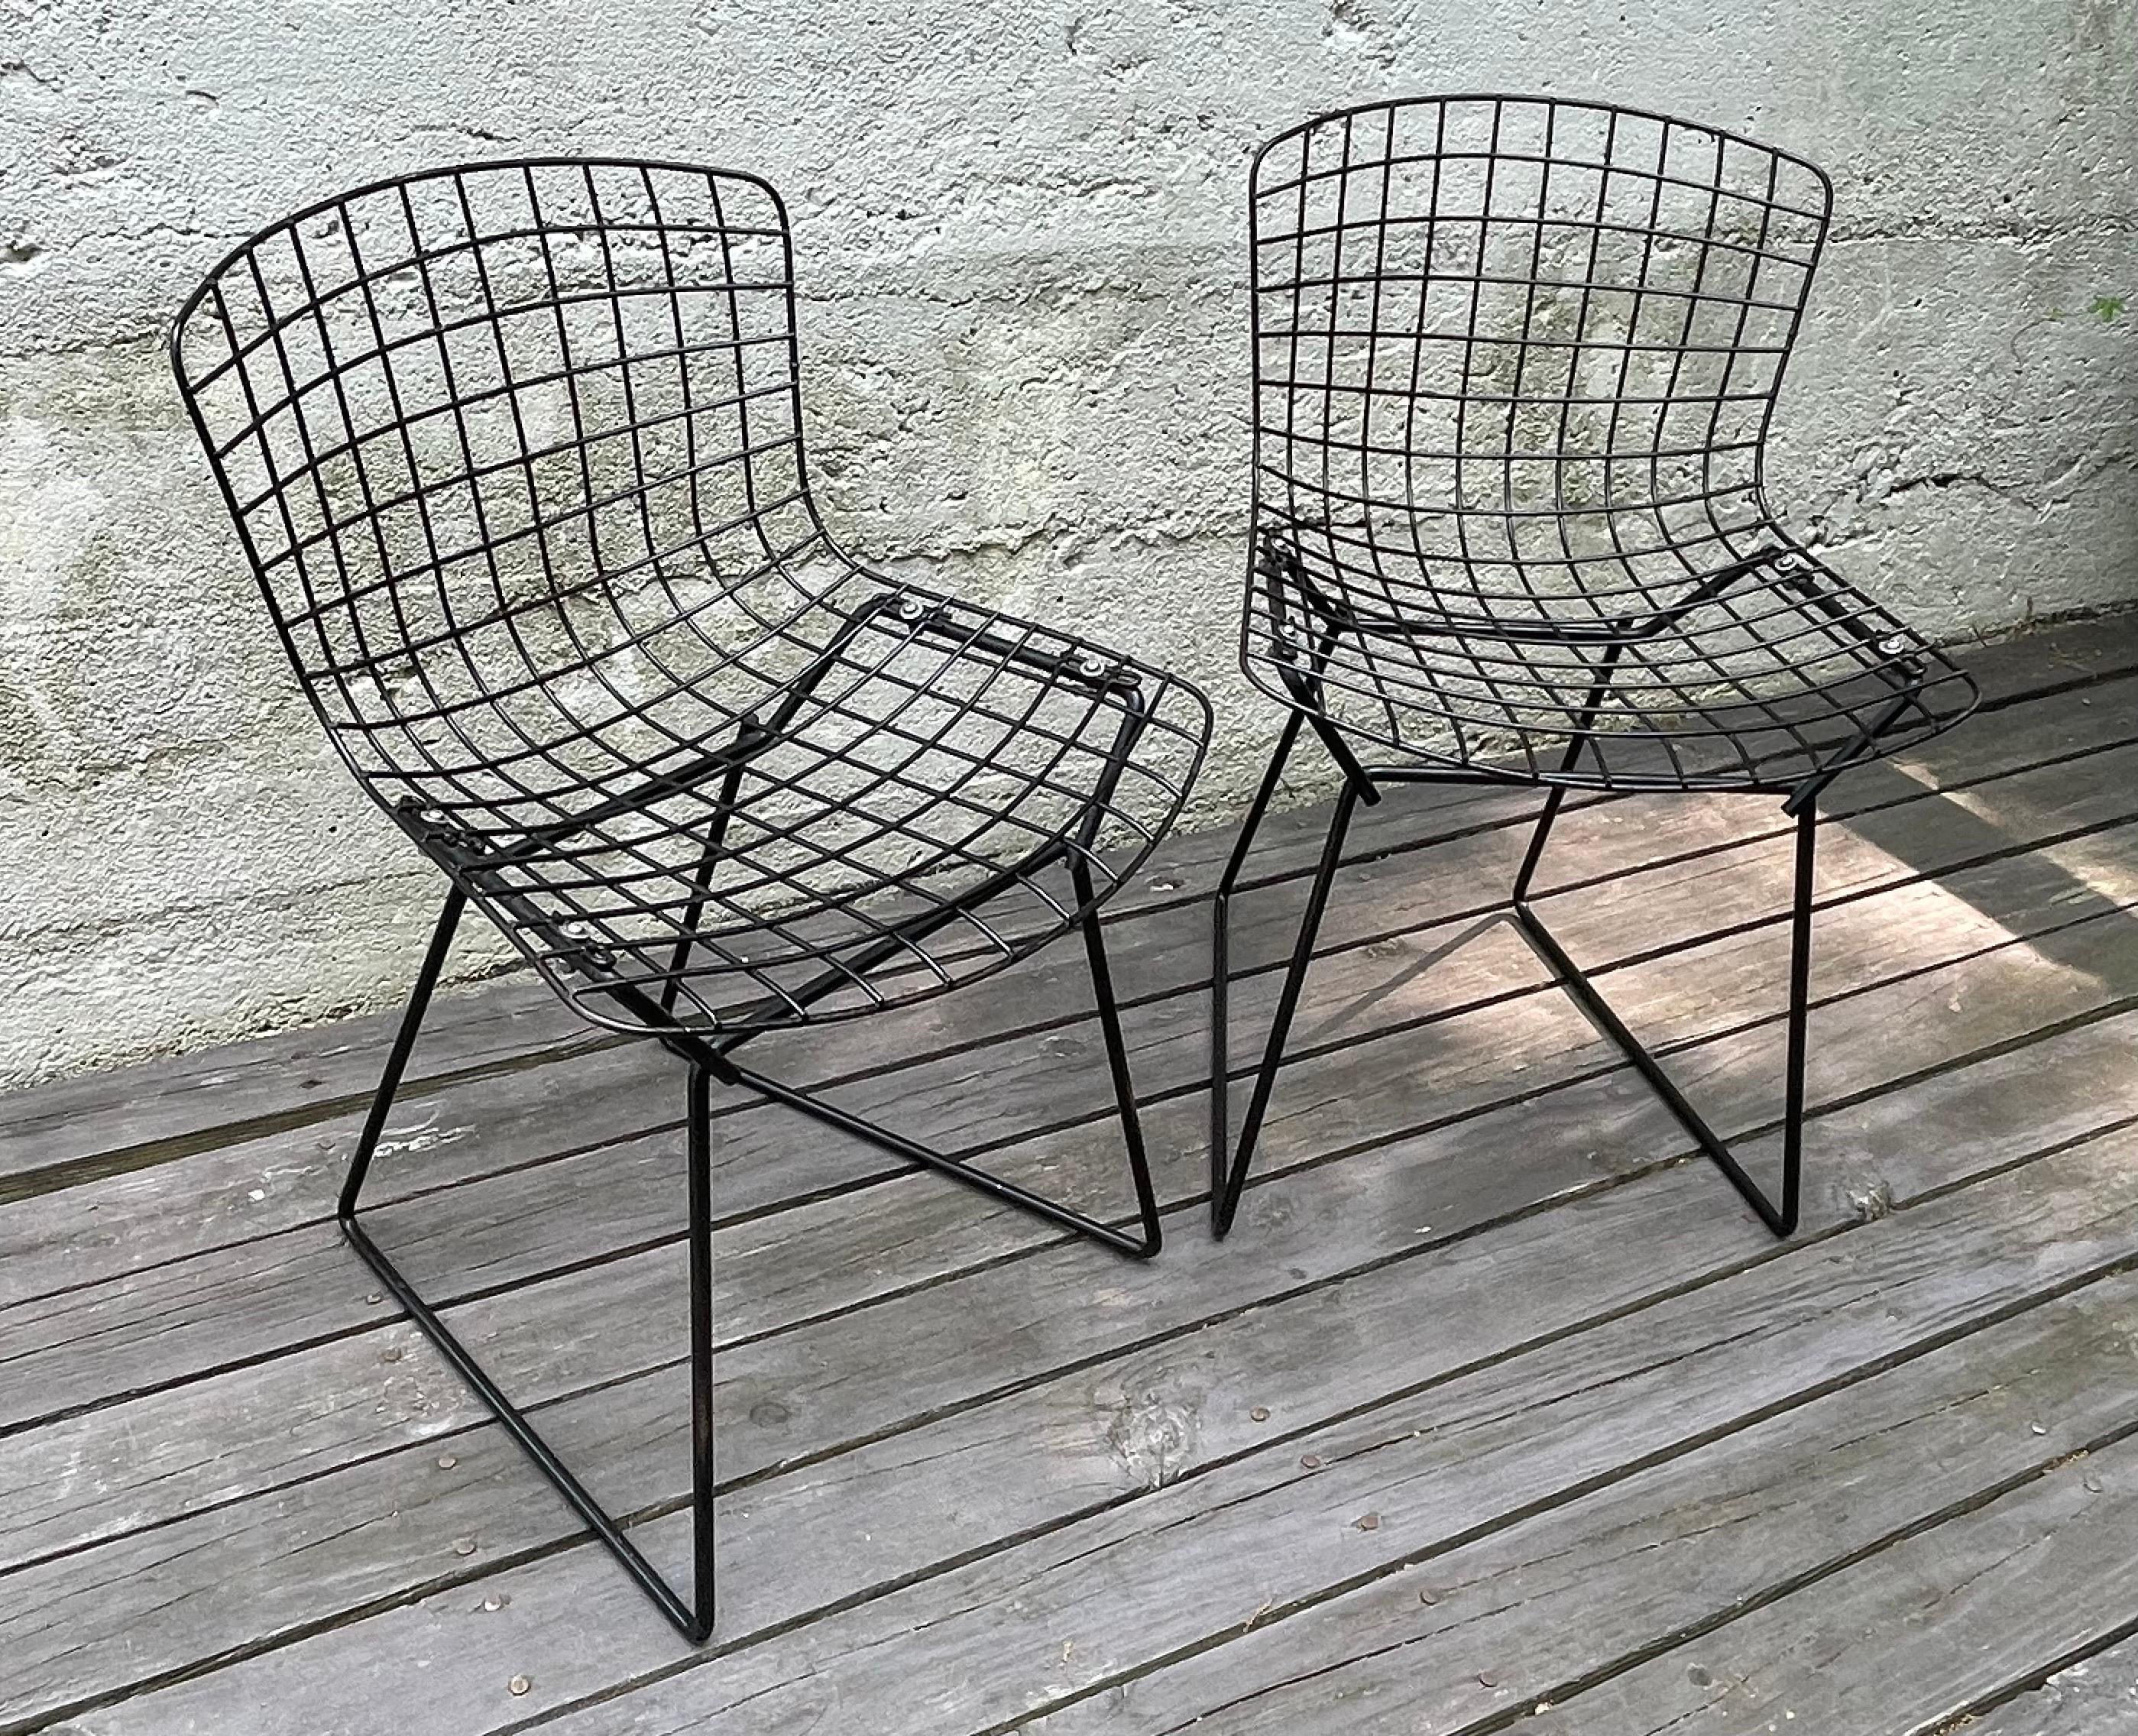 Iconic midcentury Harry Bertoia black wire mesh side chairs for Knoll International, children's Size, circa 1970.

Hans and Florence never insisted that Harry Bertoia design furniture when they originally gave him a studio in an early Knoll